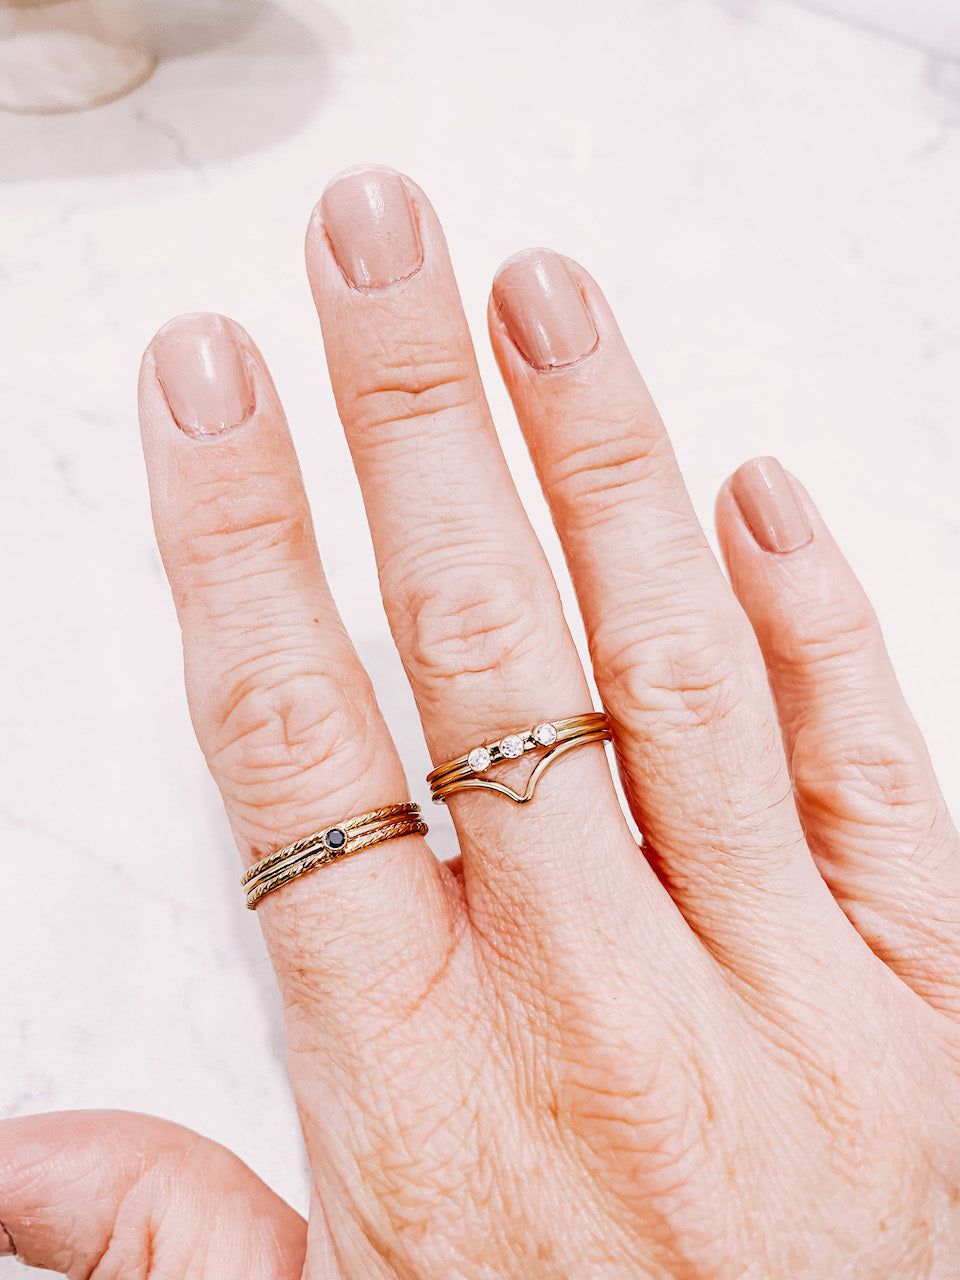 Gold Filled stacking rings worn on hand by lady startup Australian jewellery label, AW Boutique.